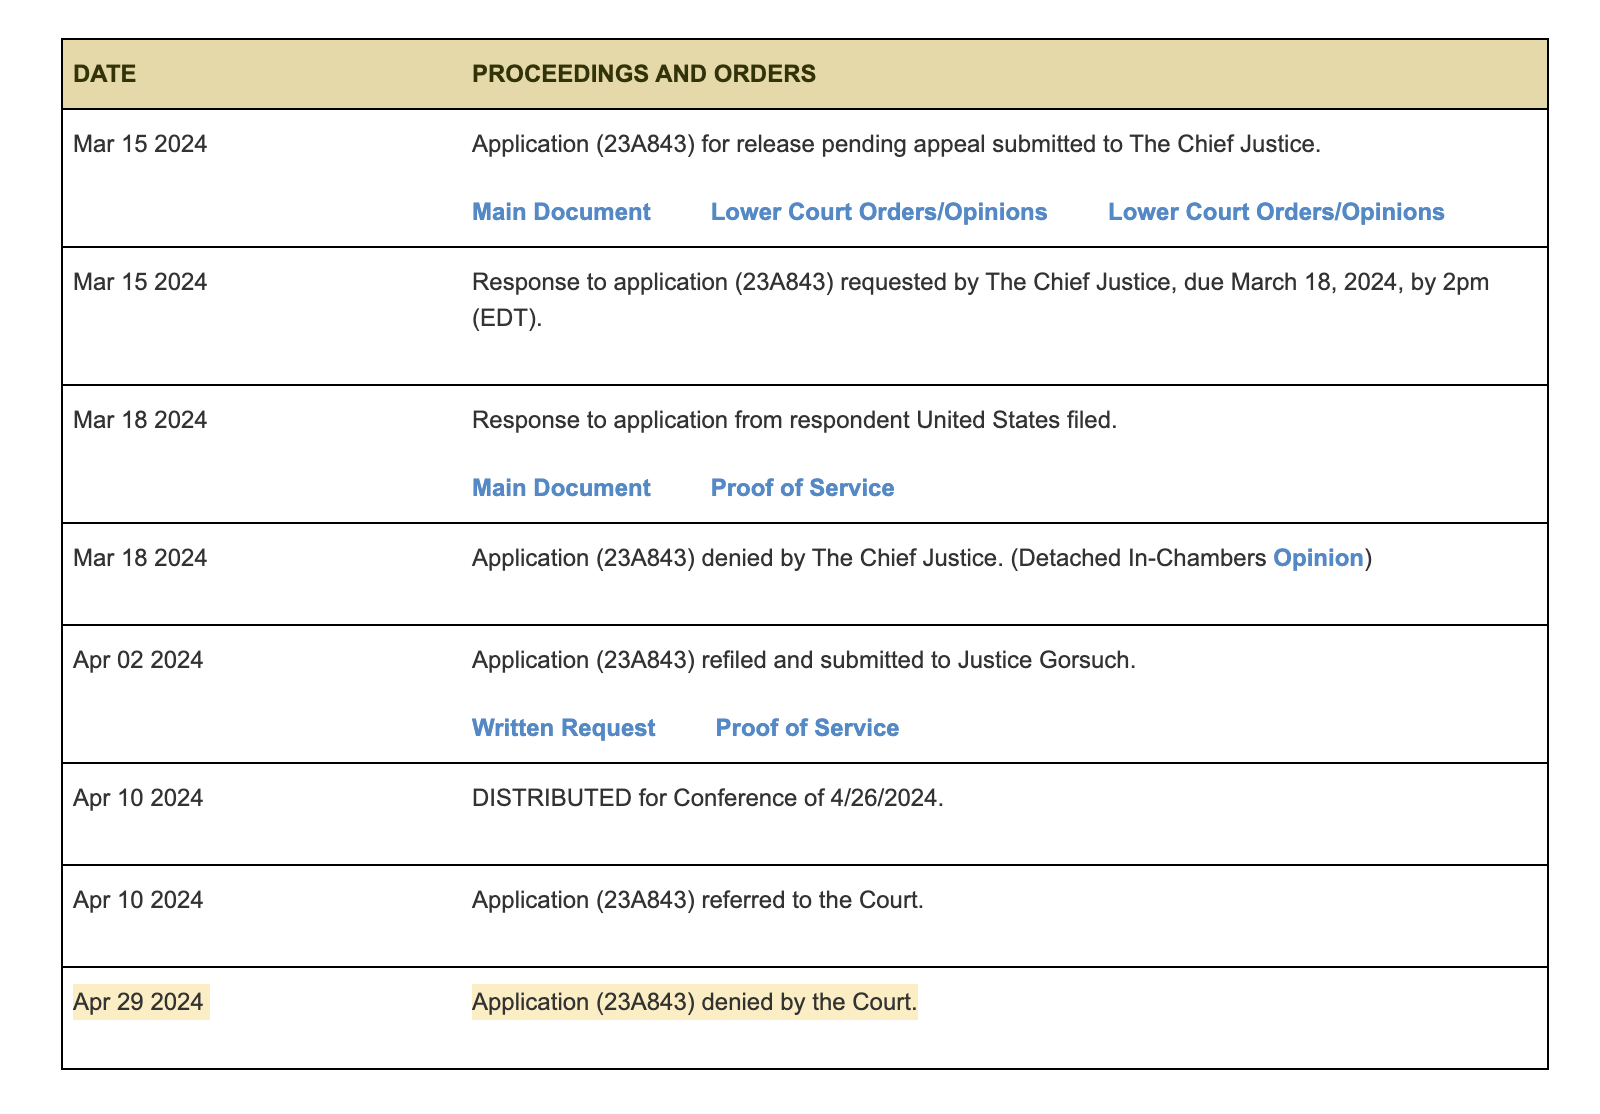 Navarro SCOTUS Docket, Application resubmitted to full court and denied without comment April 29